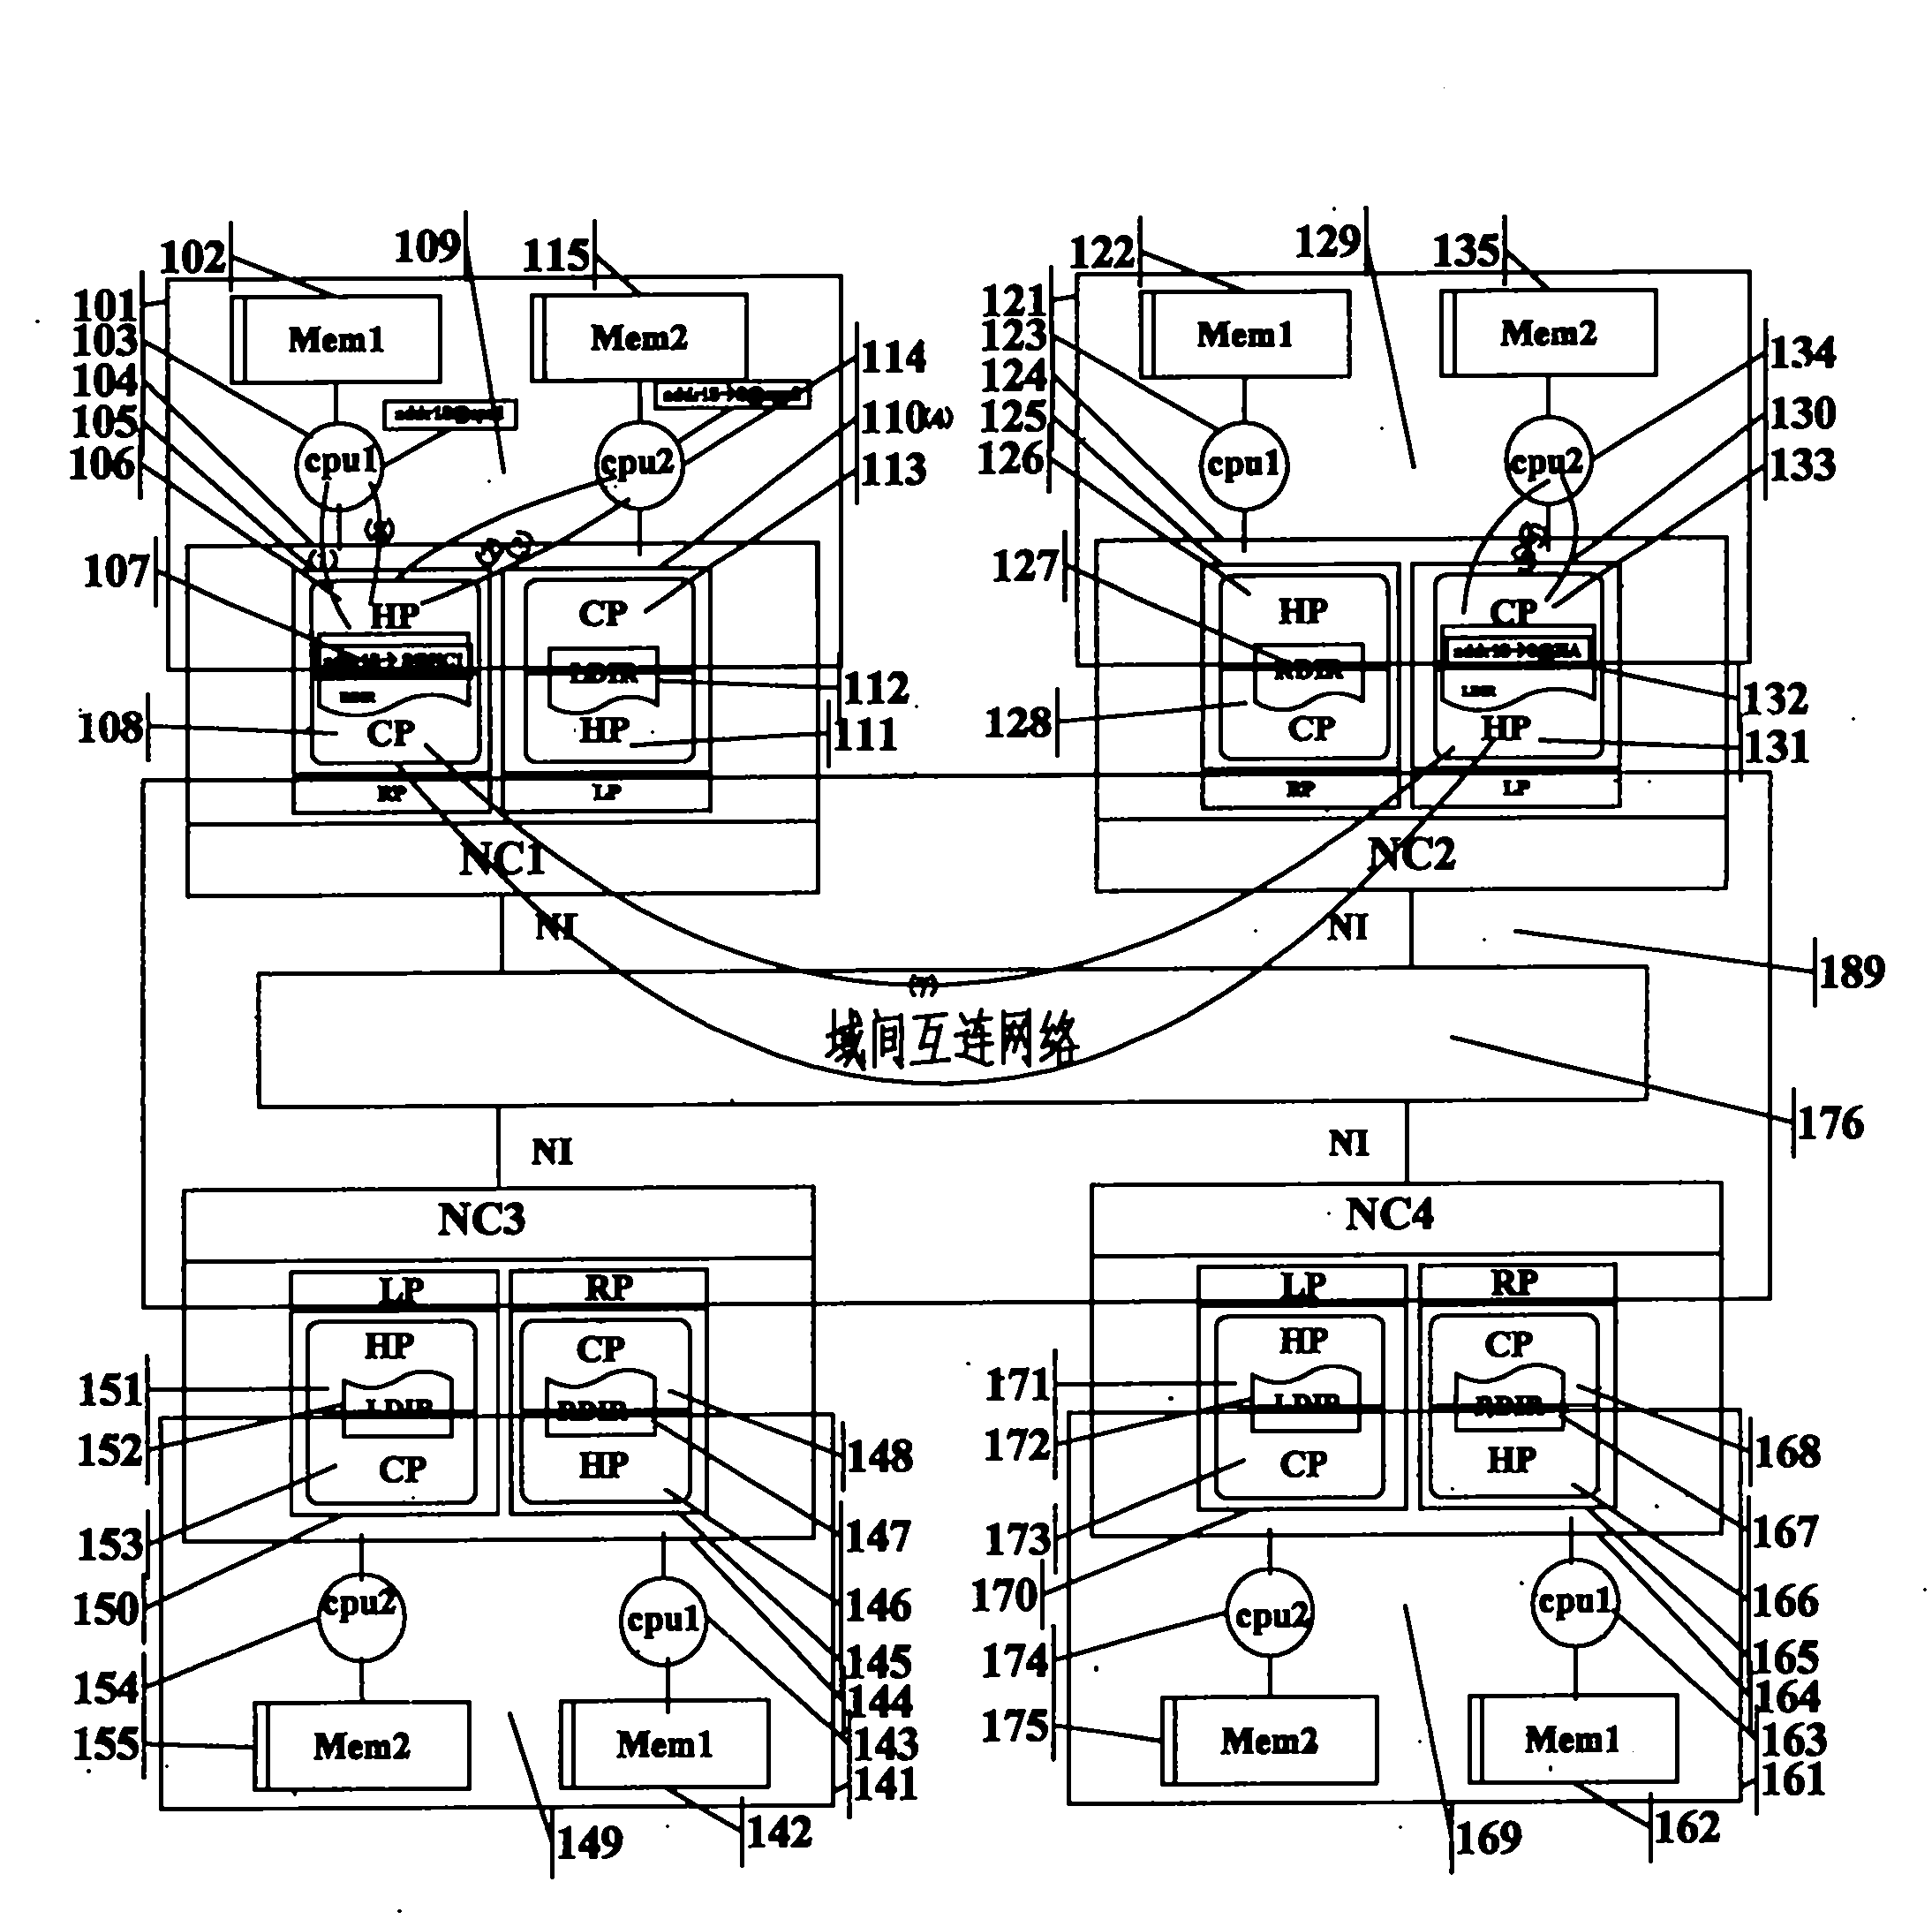 Method for constructing Share-F state in local domain of multi-level cache consistency domain system